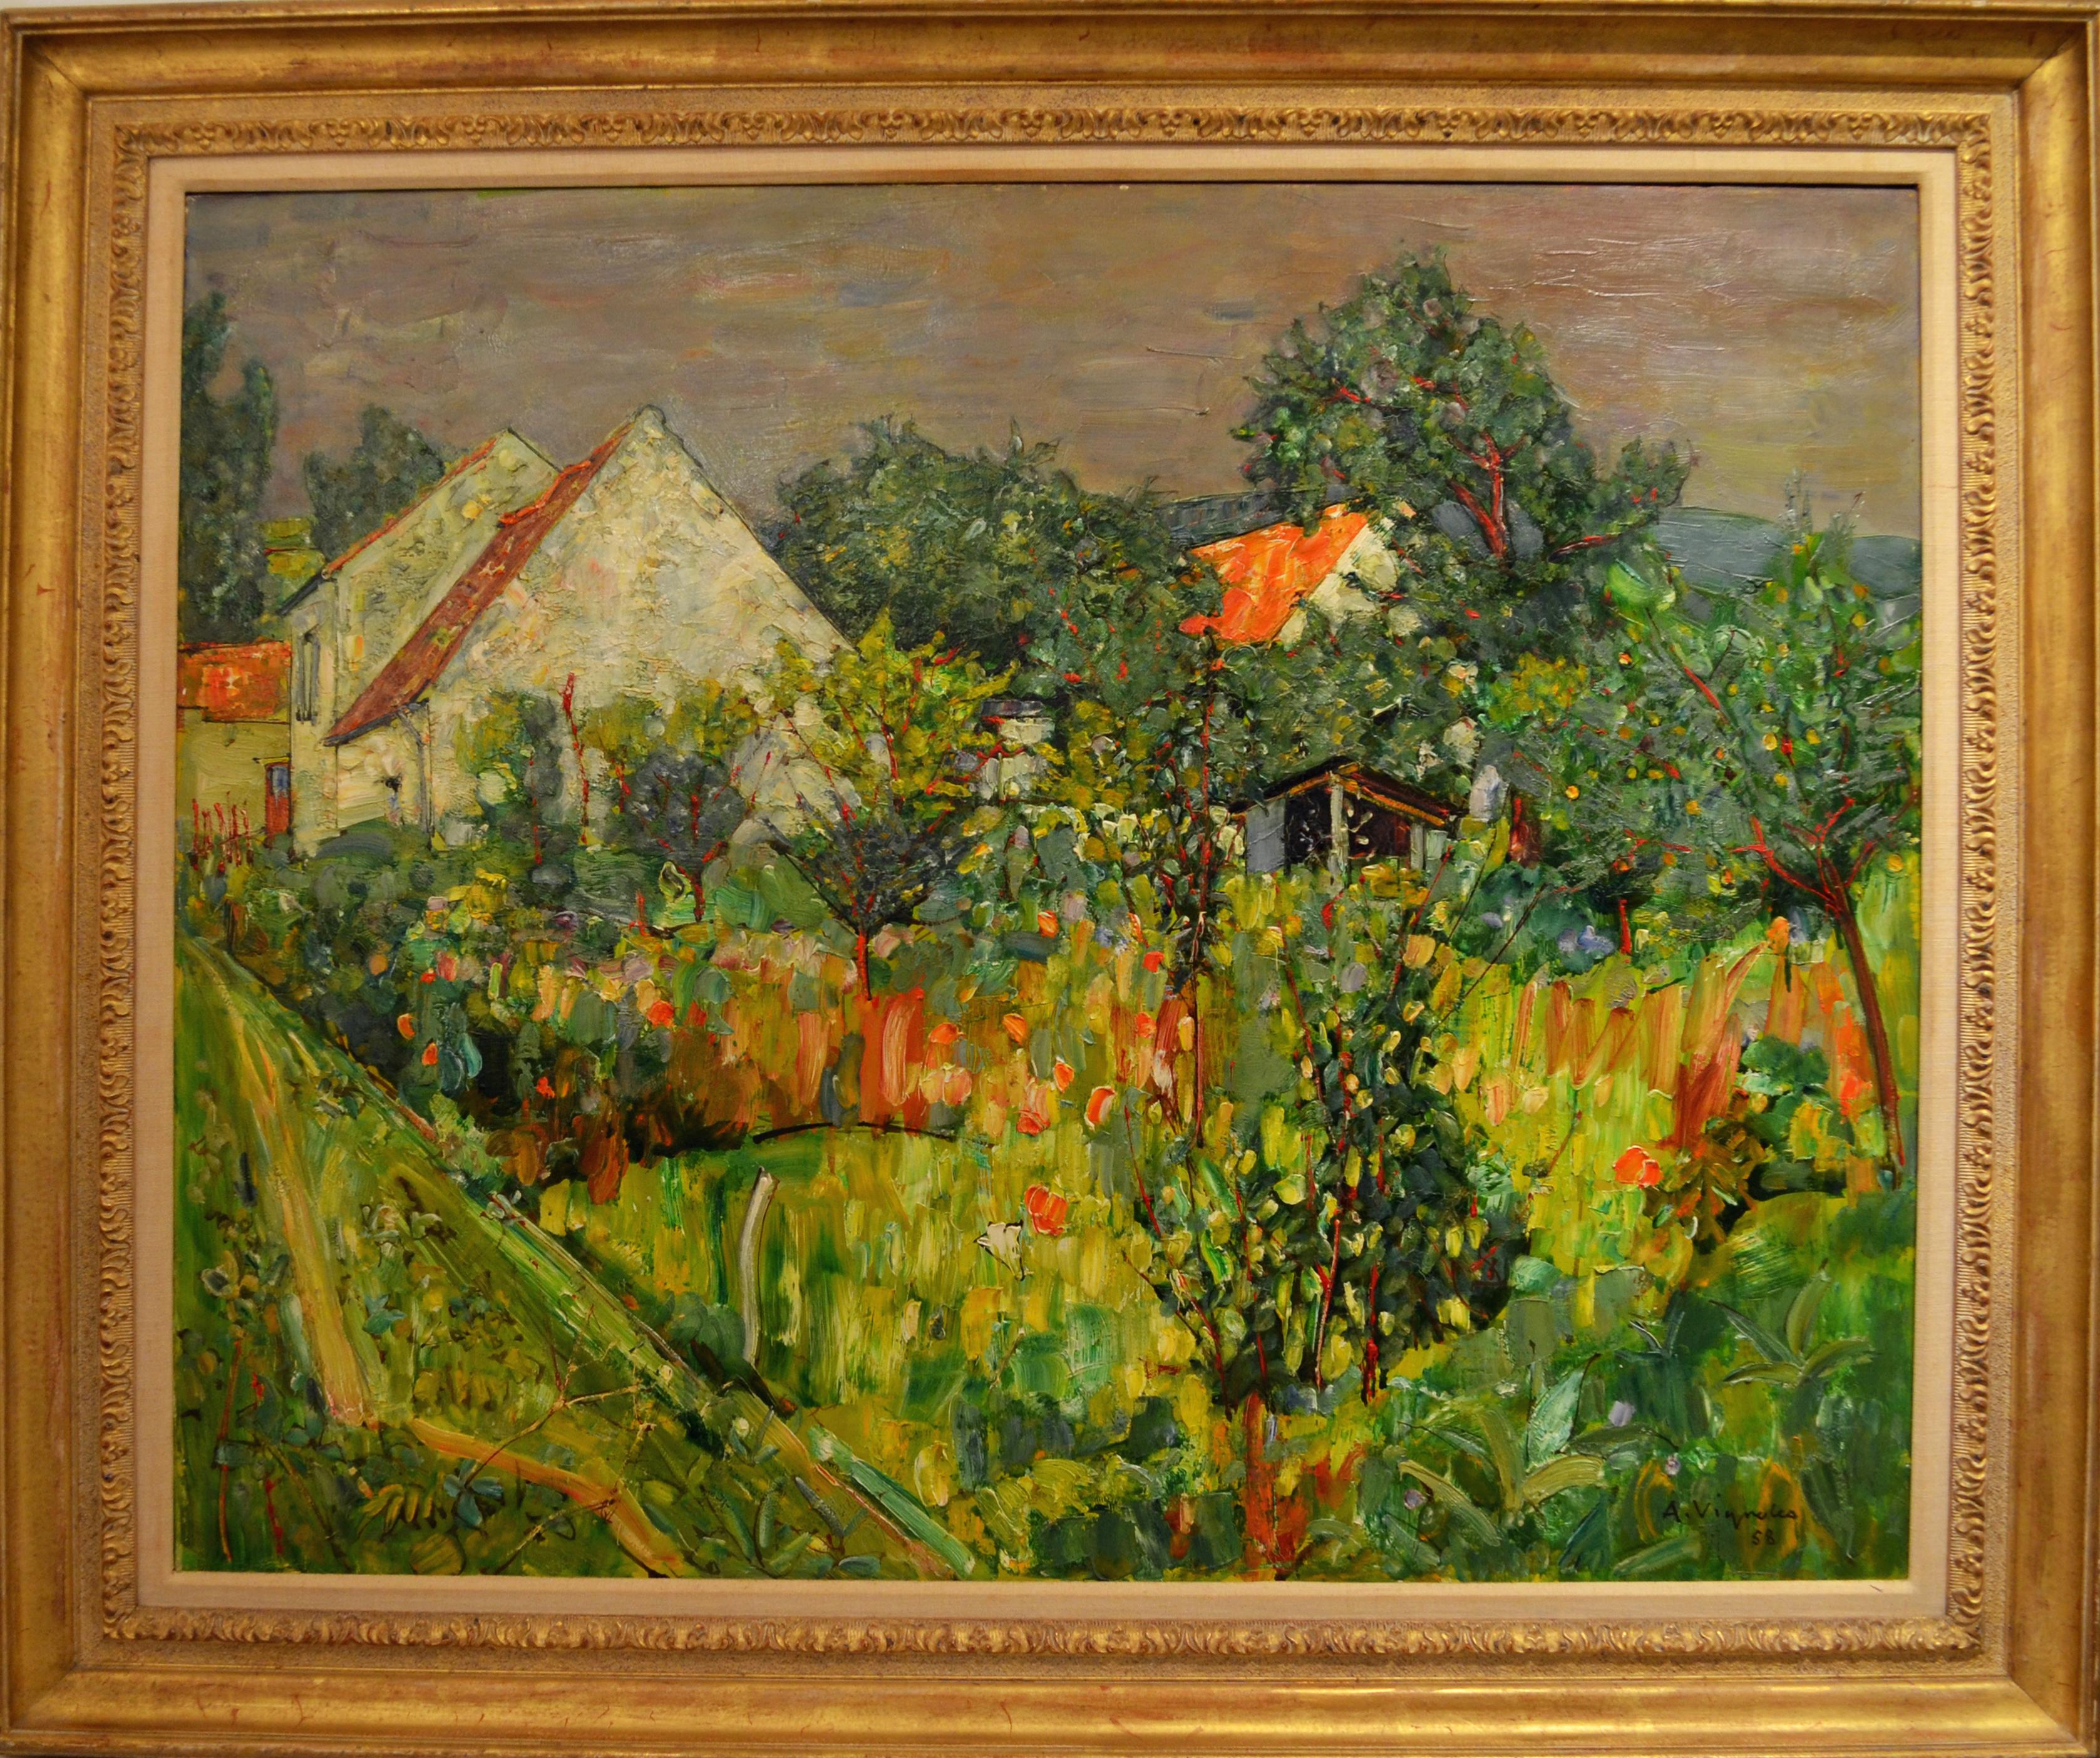 Andre Vignoles Landscape Painting - Vignoles, 1958 "House with Garden Behind a Fence" Oil/Canvas 32x39 Inches